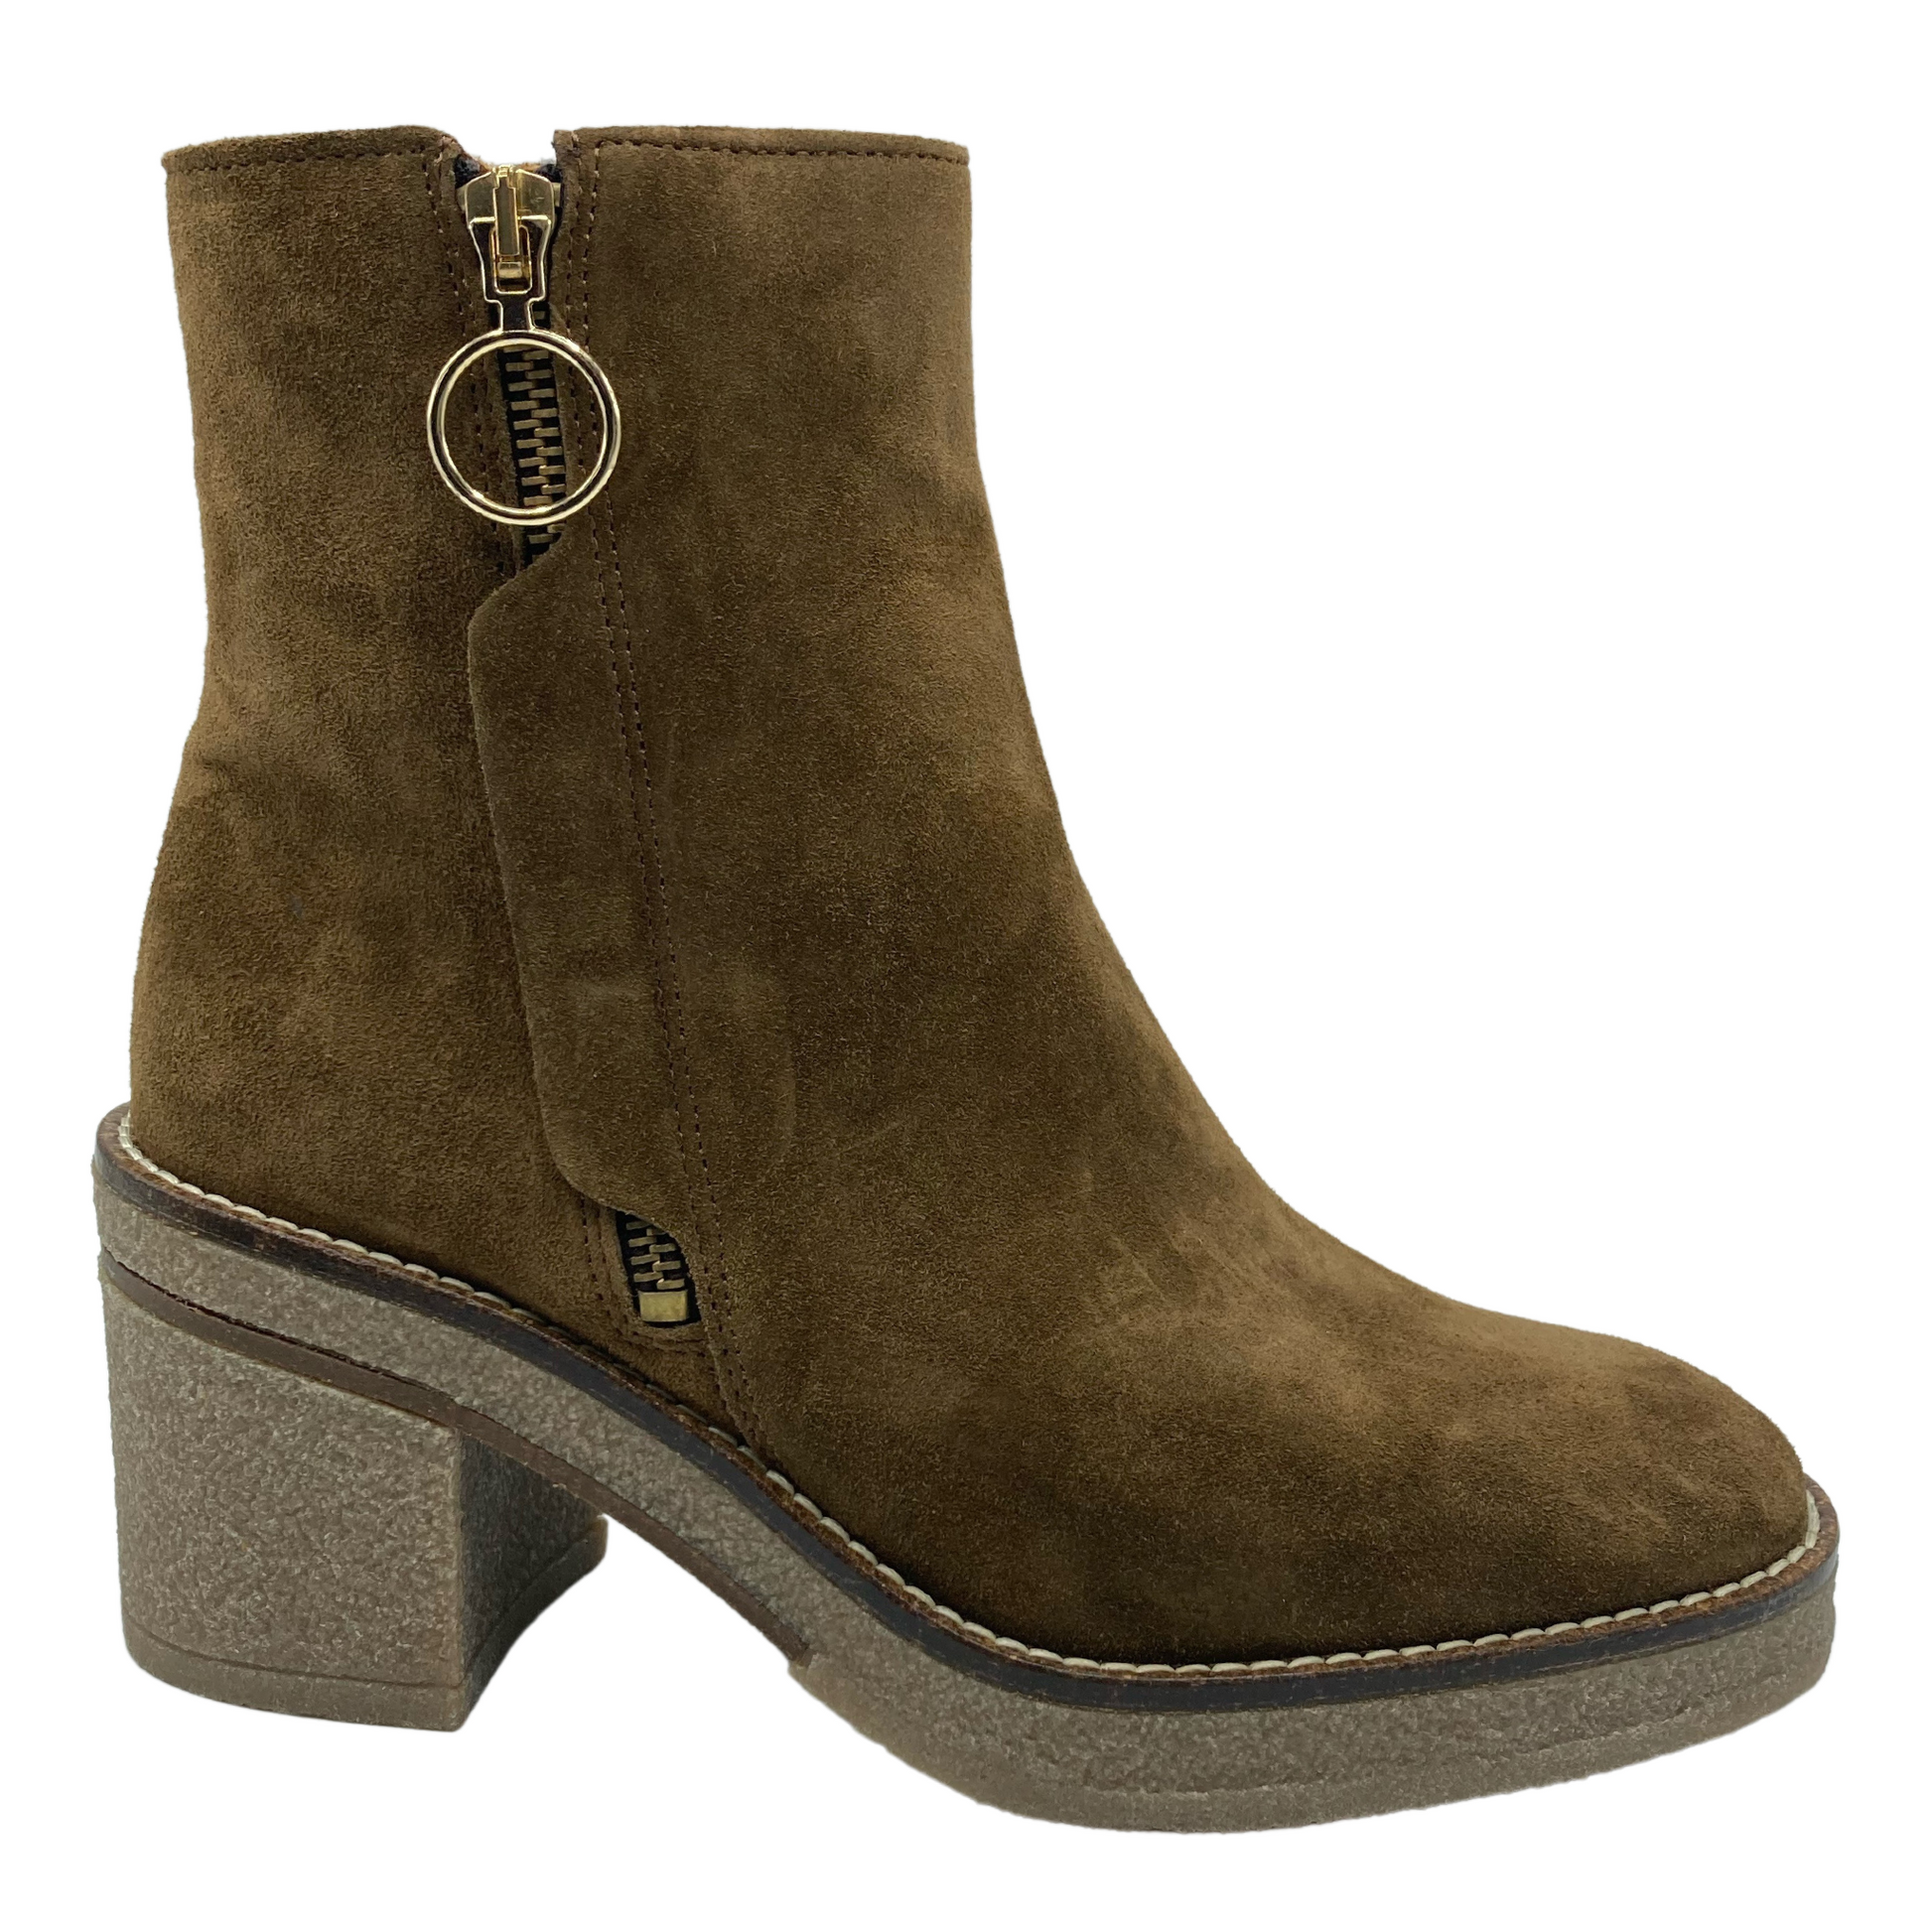 Right facing view of suede short boot with gold side zipper